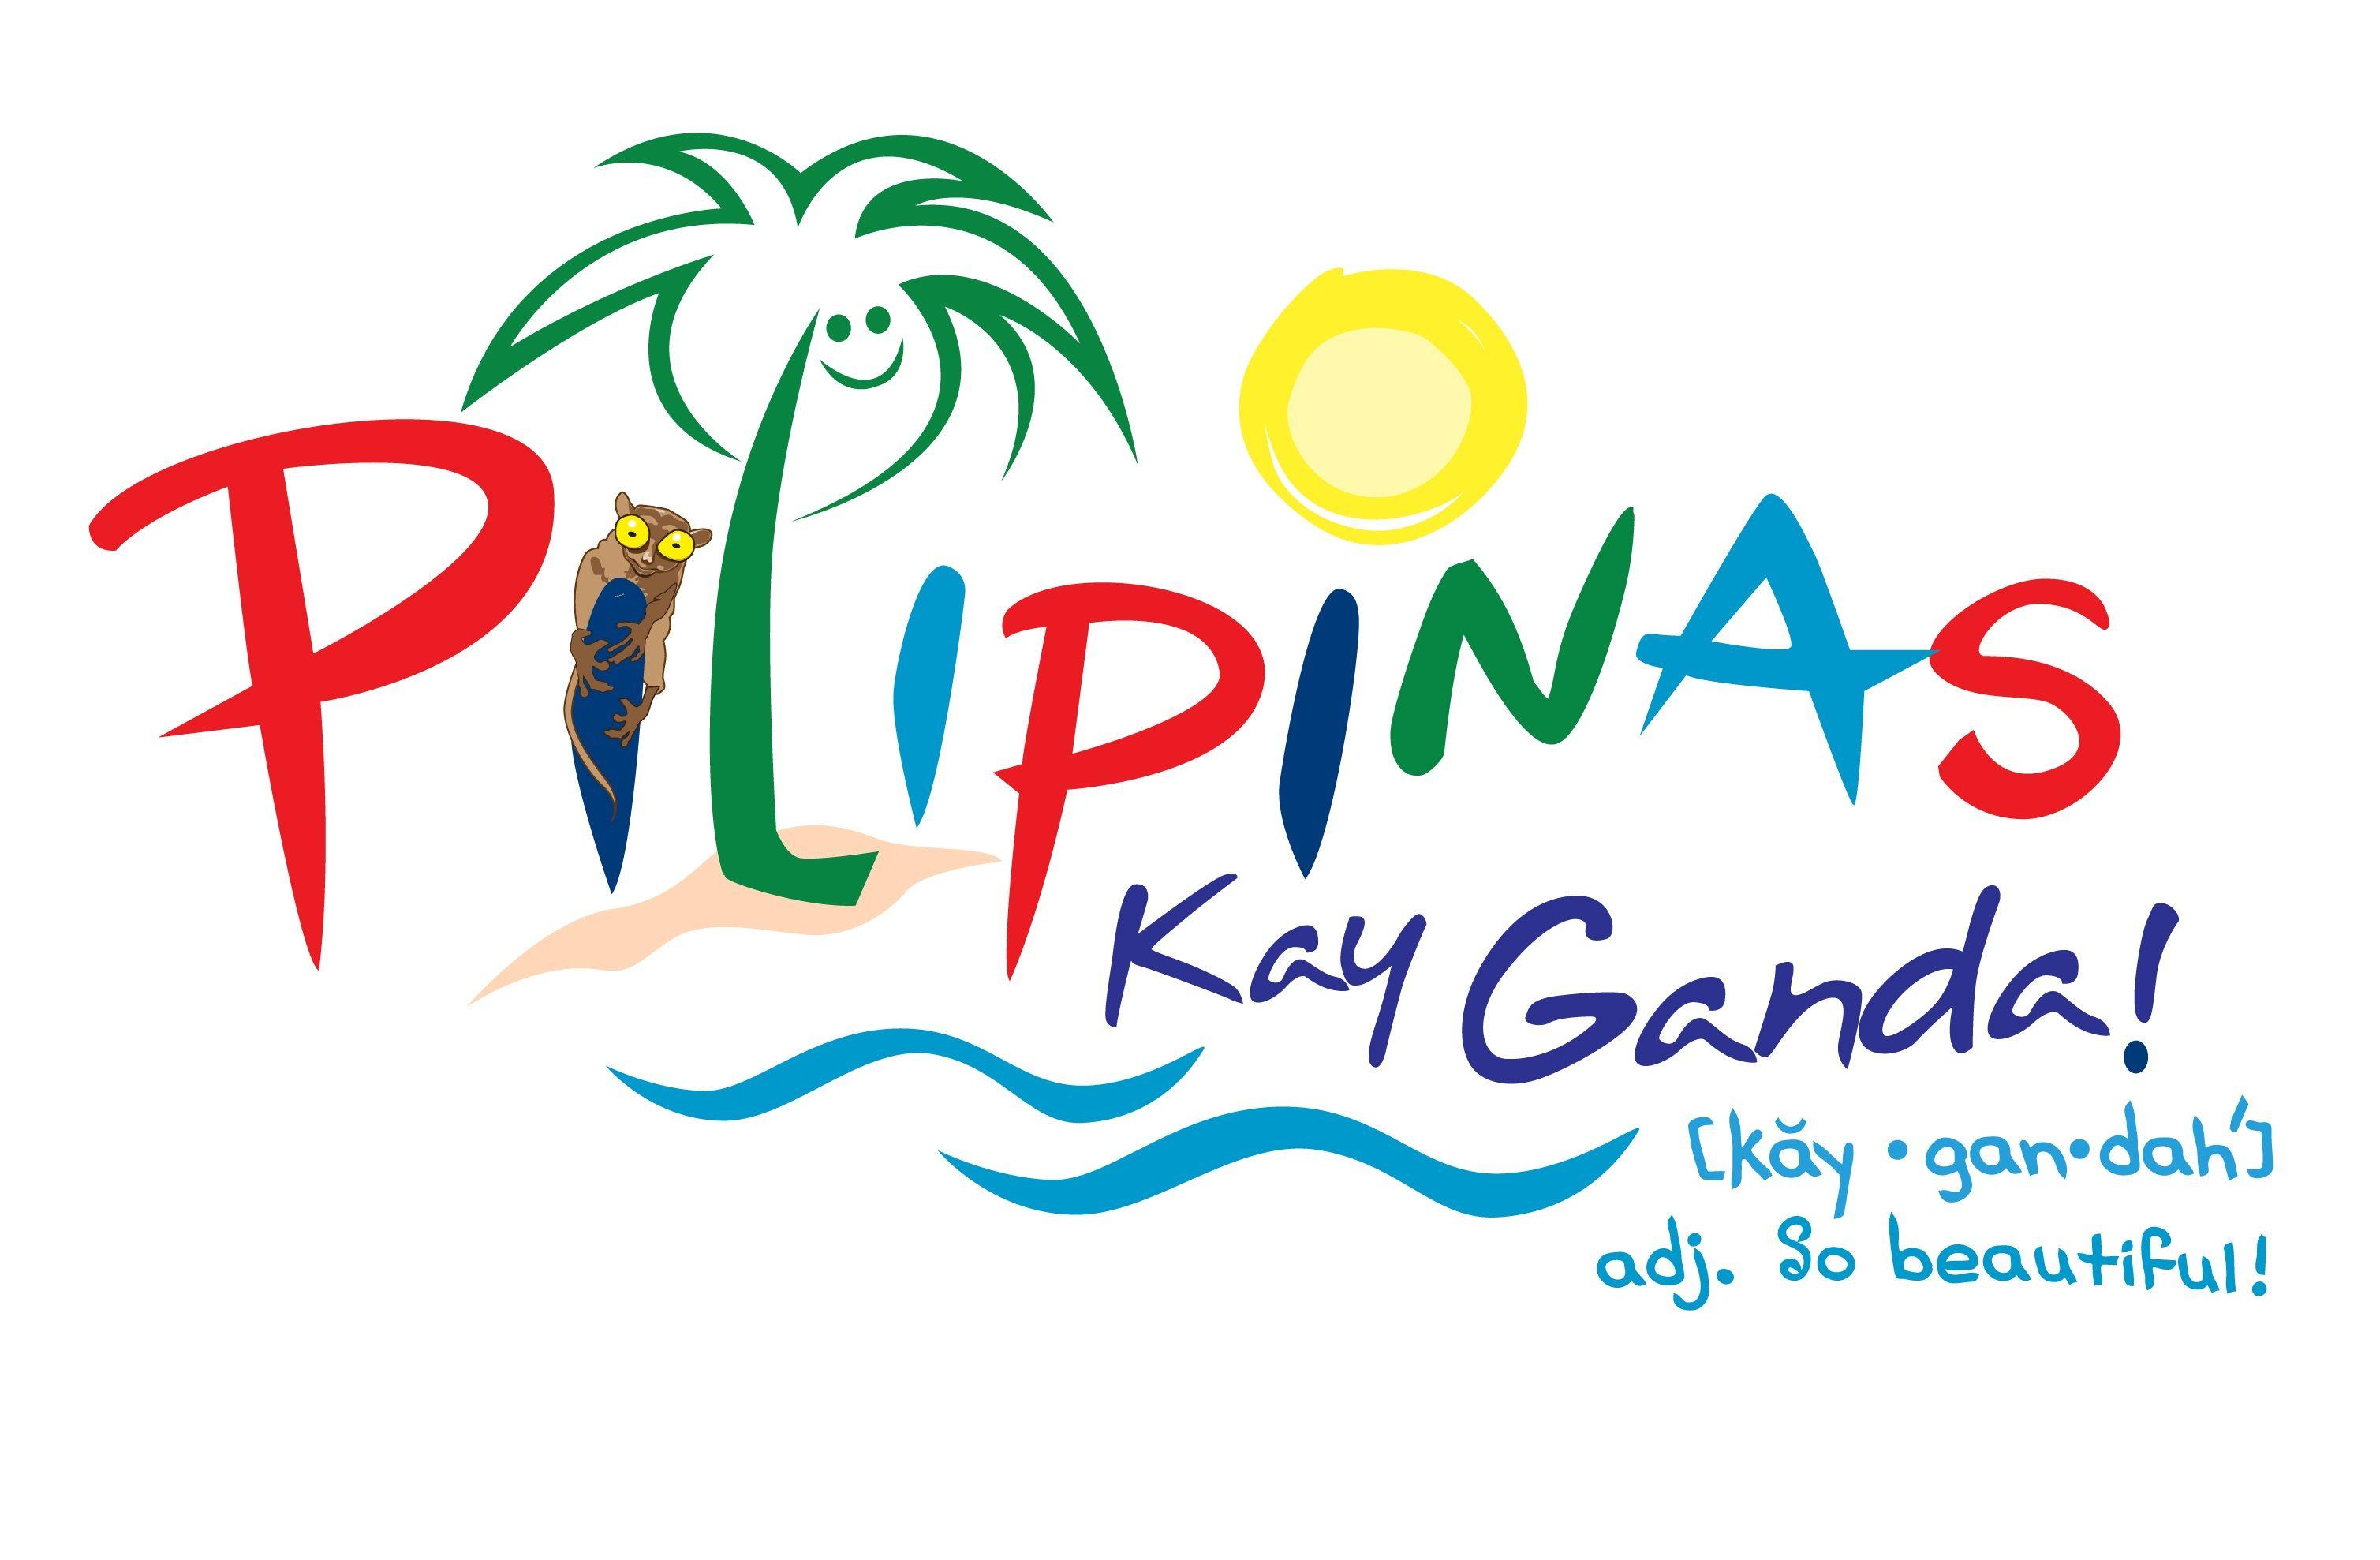 Phillippines Logo - Pilipinas Kay Ganda: Philippines New Brand from the Department of ...